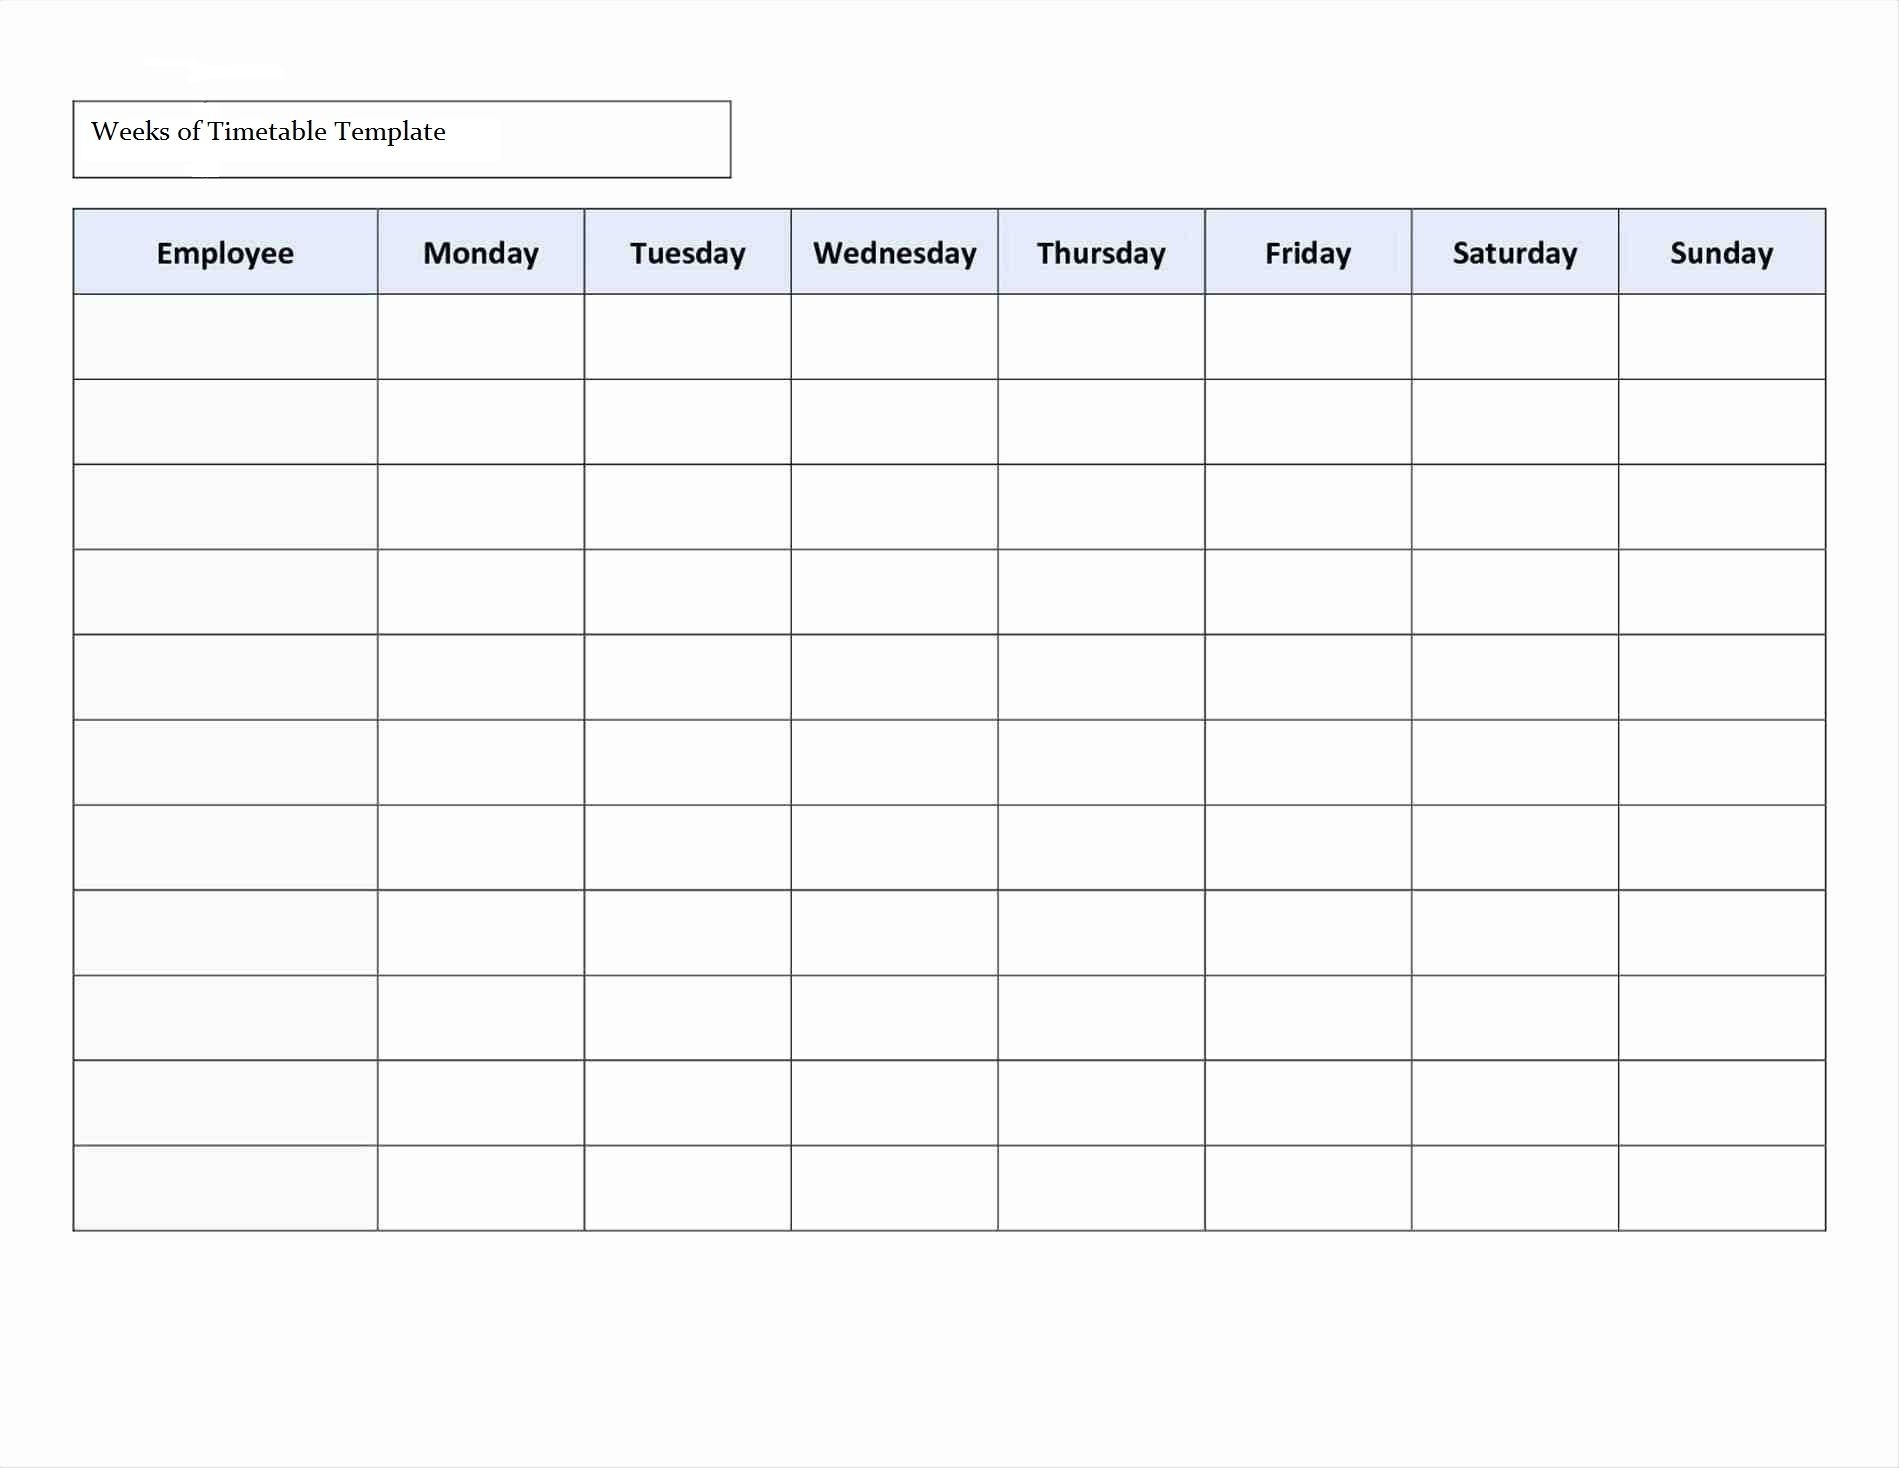 Timetable Template #dailytimetabletemplate | Cleaning